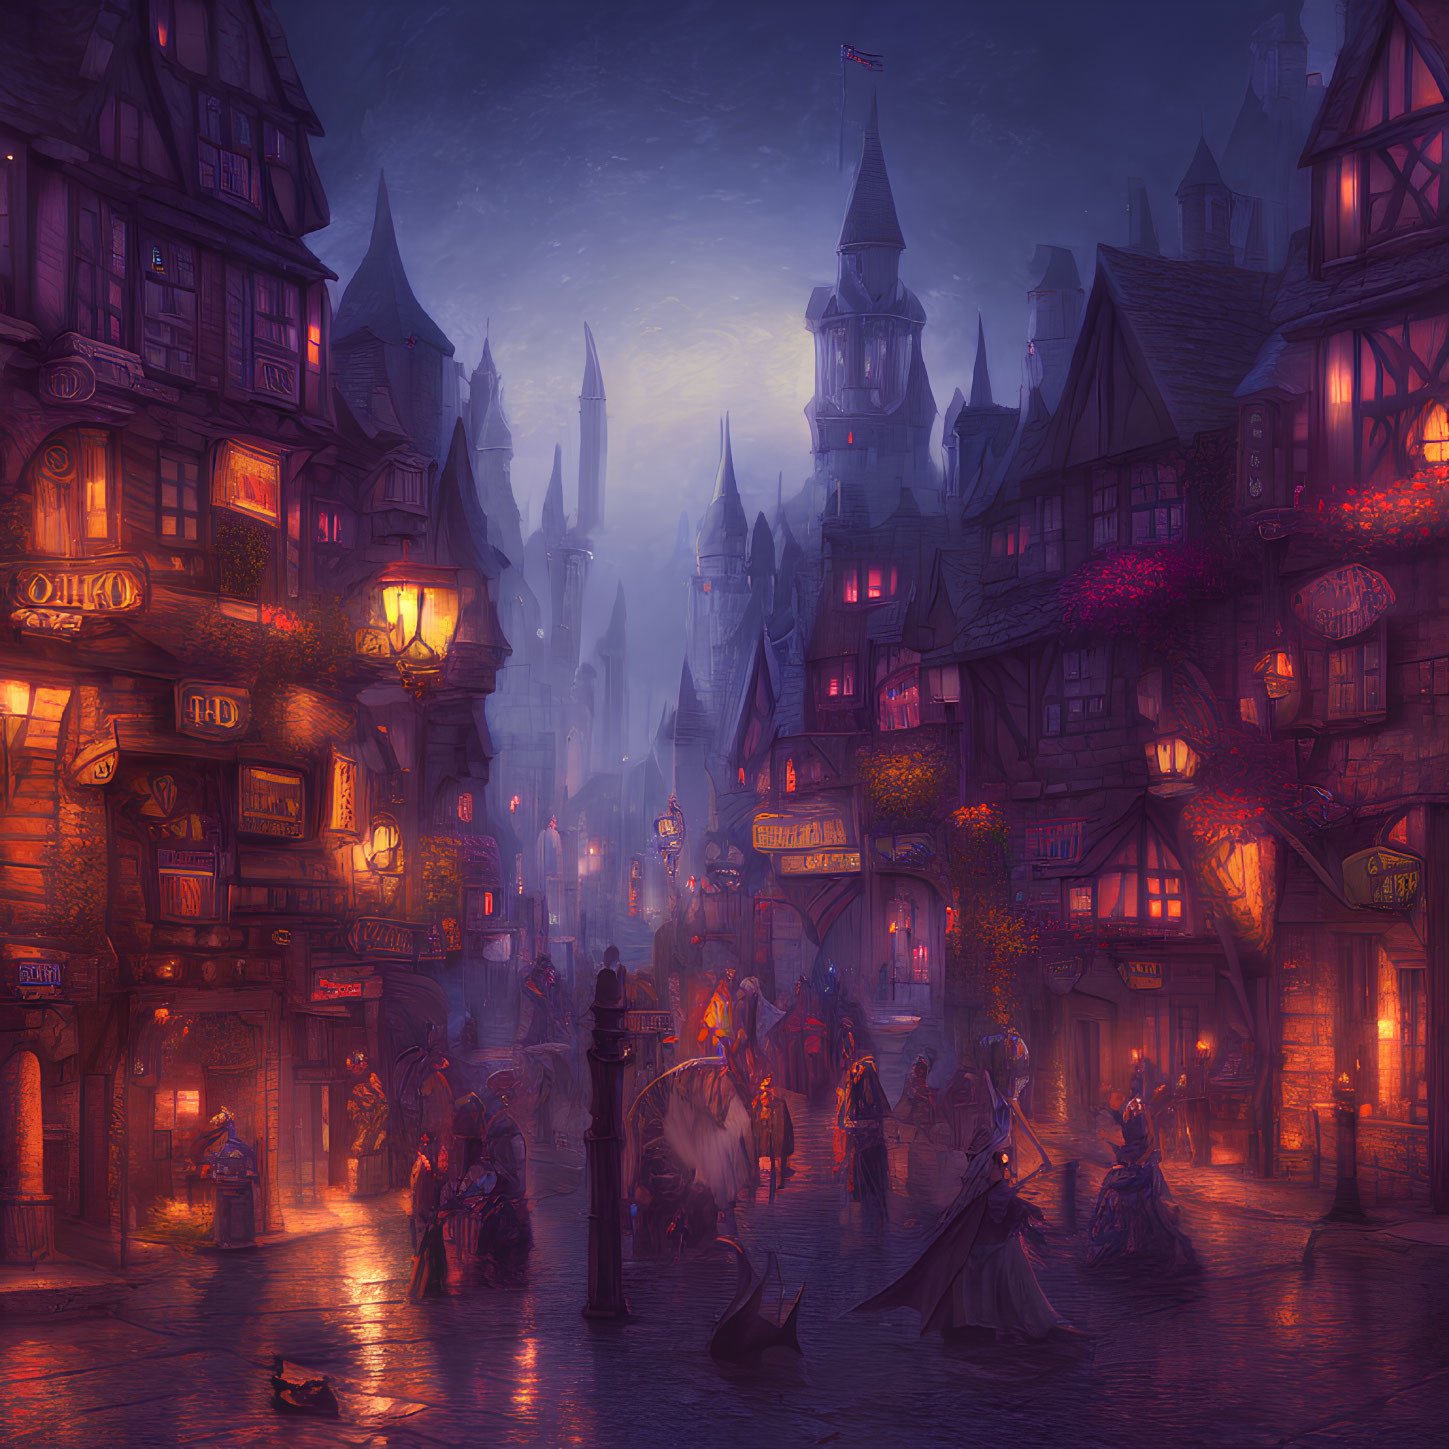 Medieval city street at twilight with cloaked figures and ornate buildings